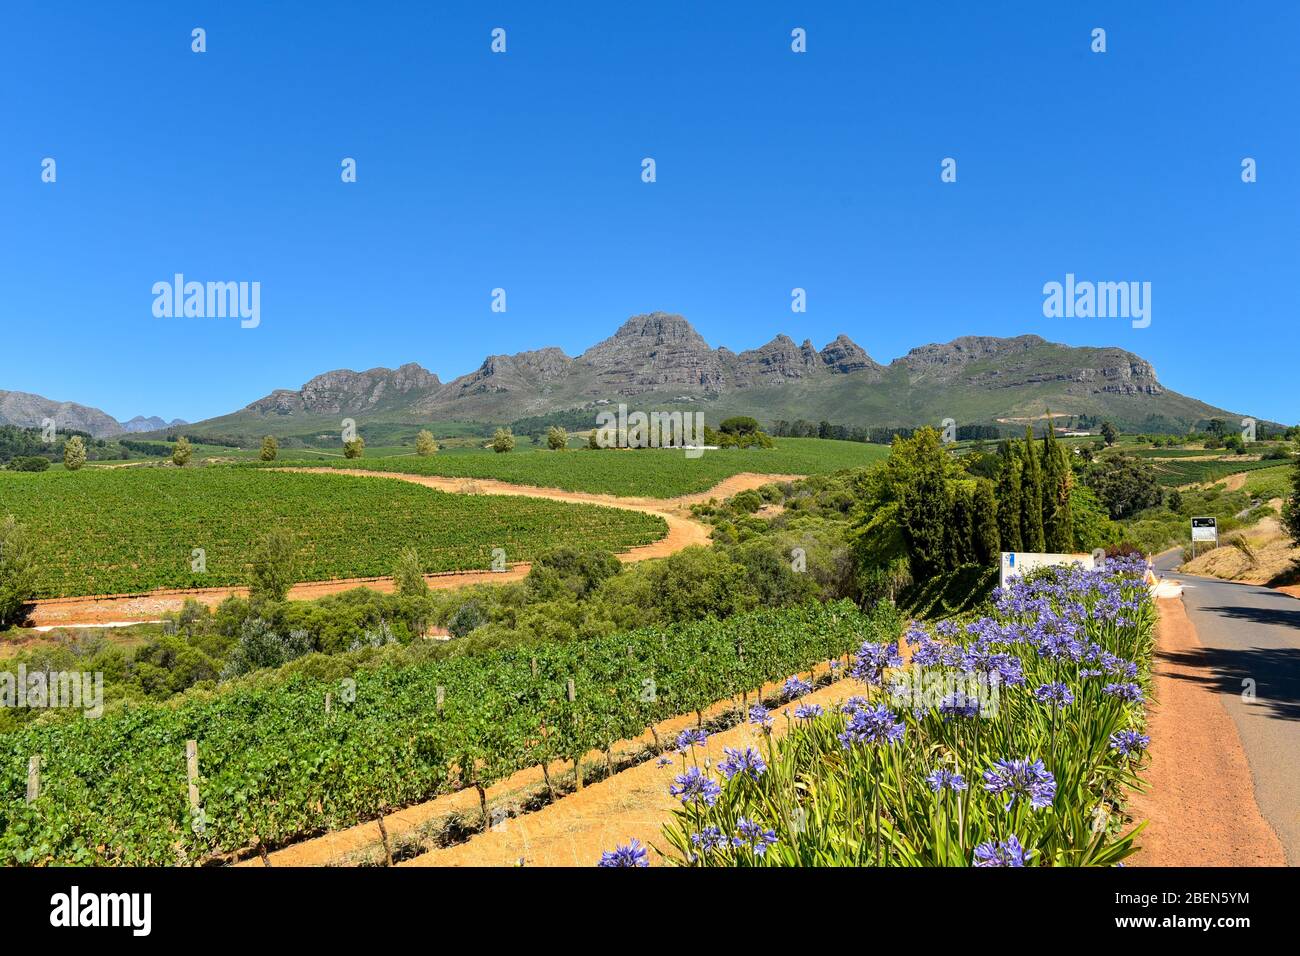 A nice scenery of Stellenbosch Grapes Gardens, Western Cape, South Africa Stock Photo